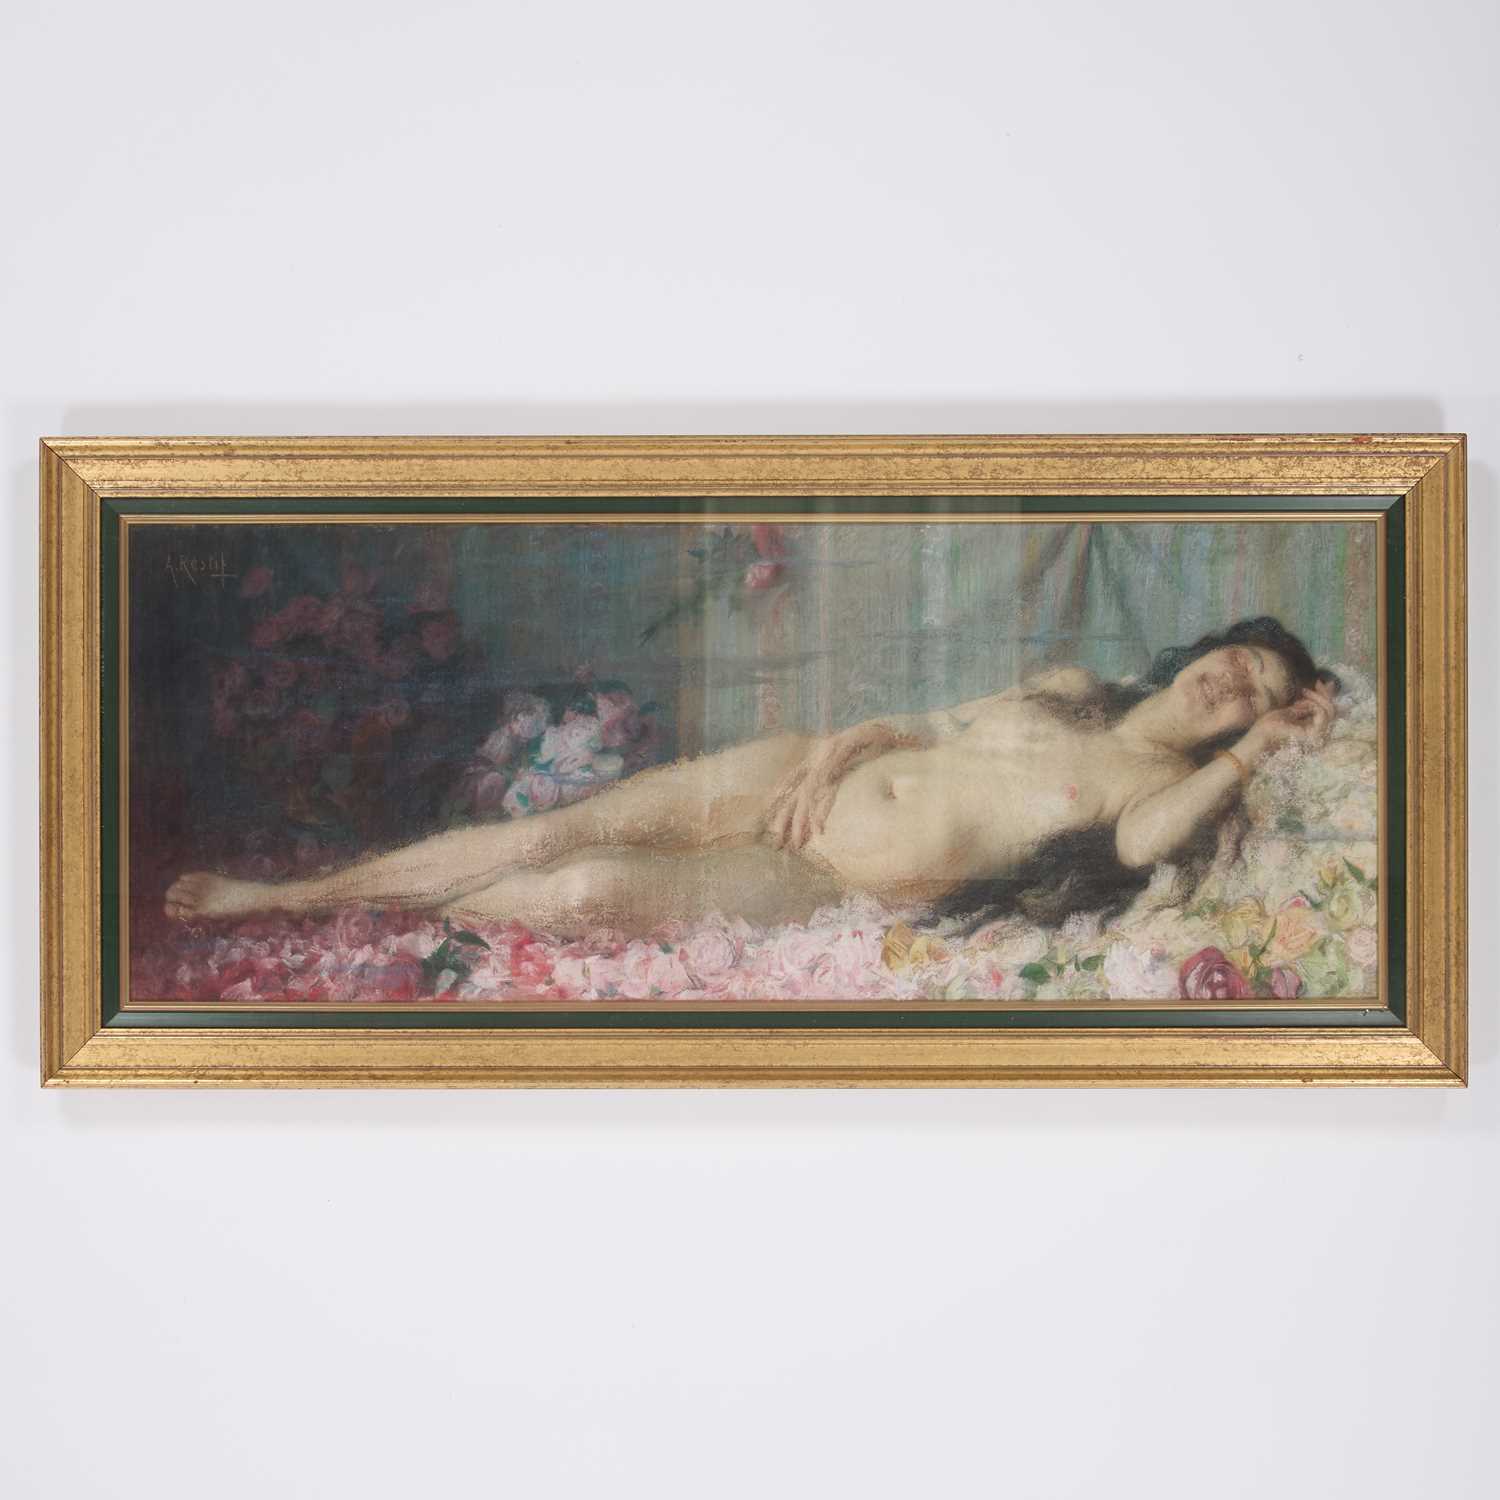 A. RESTIF (FRENCH LATE 19TH CENTURY) A NUDE ON A BED OF FLOWERS - Image 2 of 3